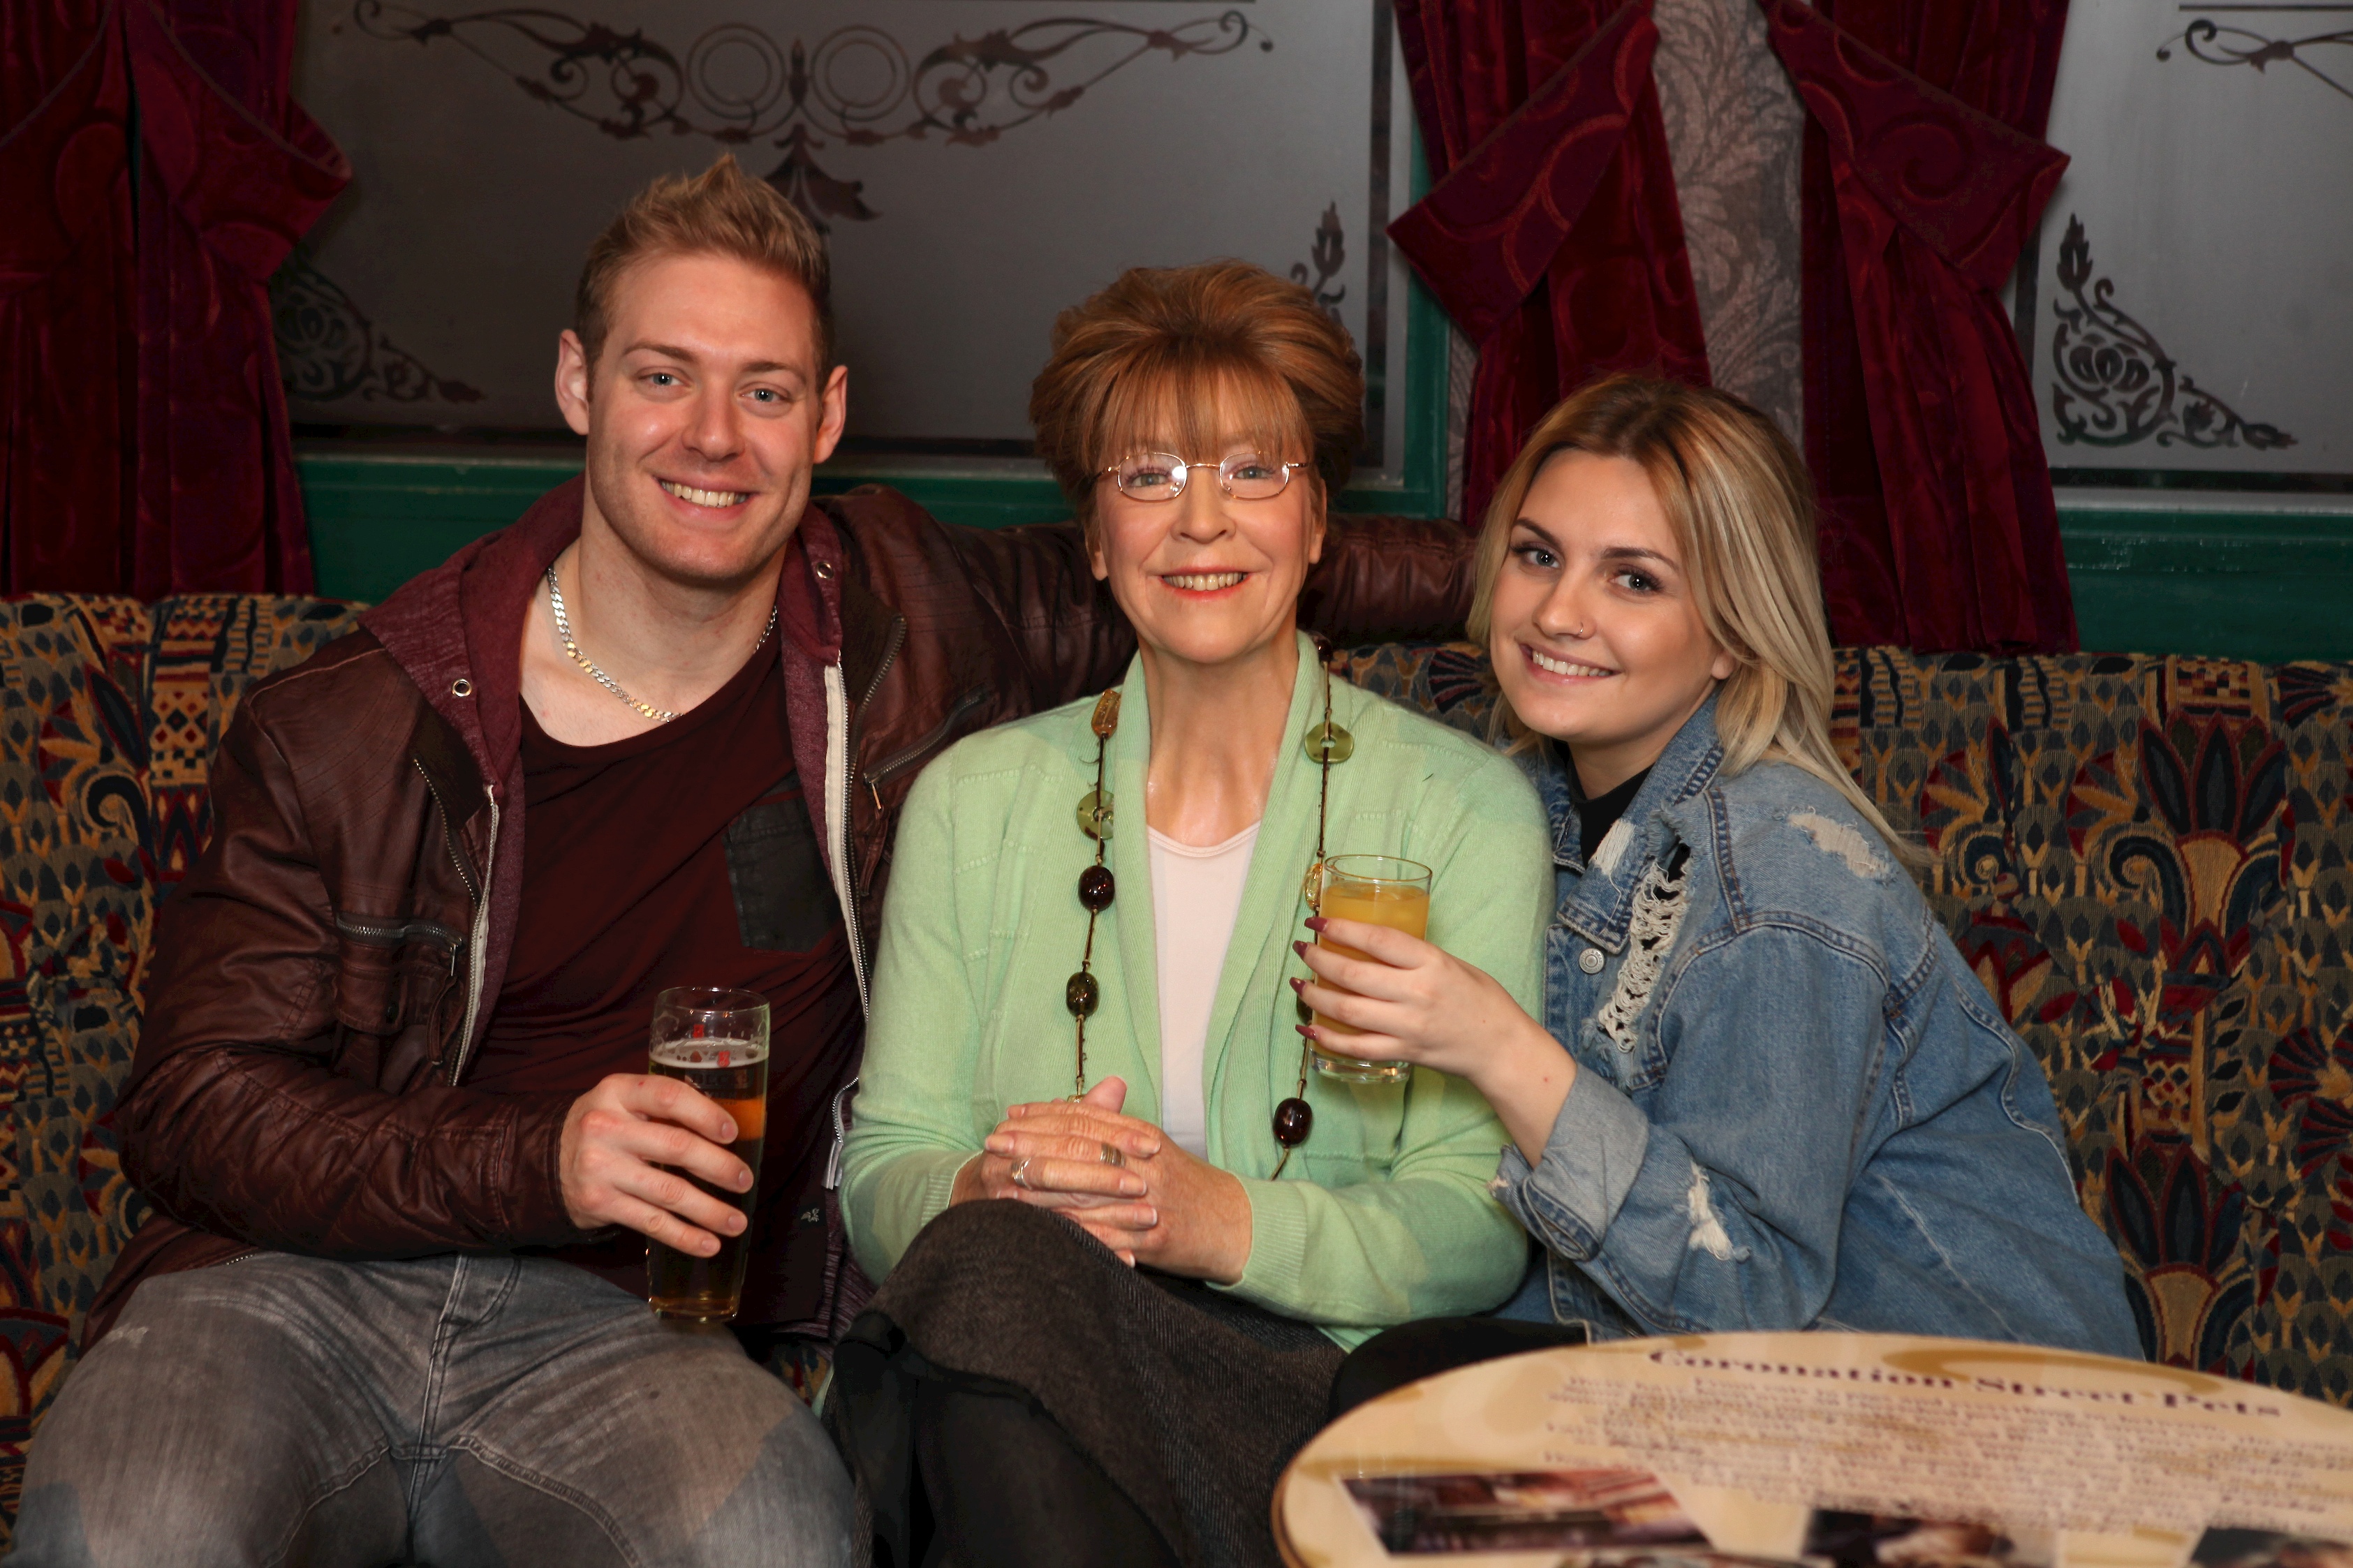 Guests take their photo with Deidre Barlow's wax figure in Rovers Return at Madame Tussauds Blackpool